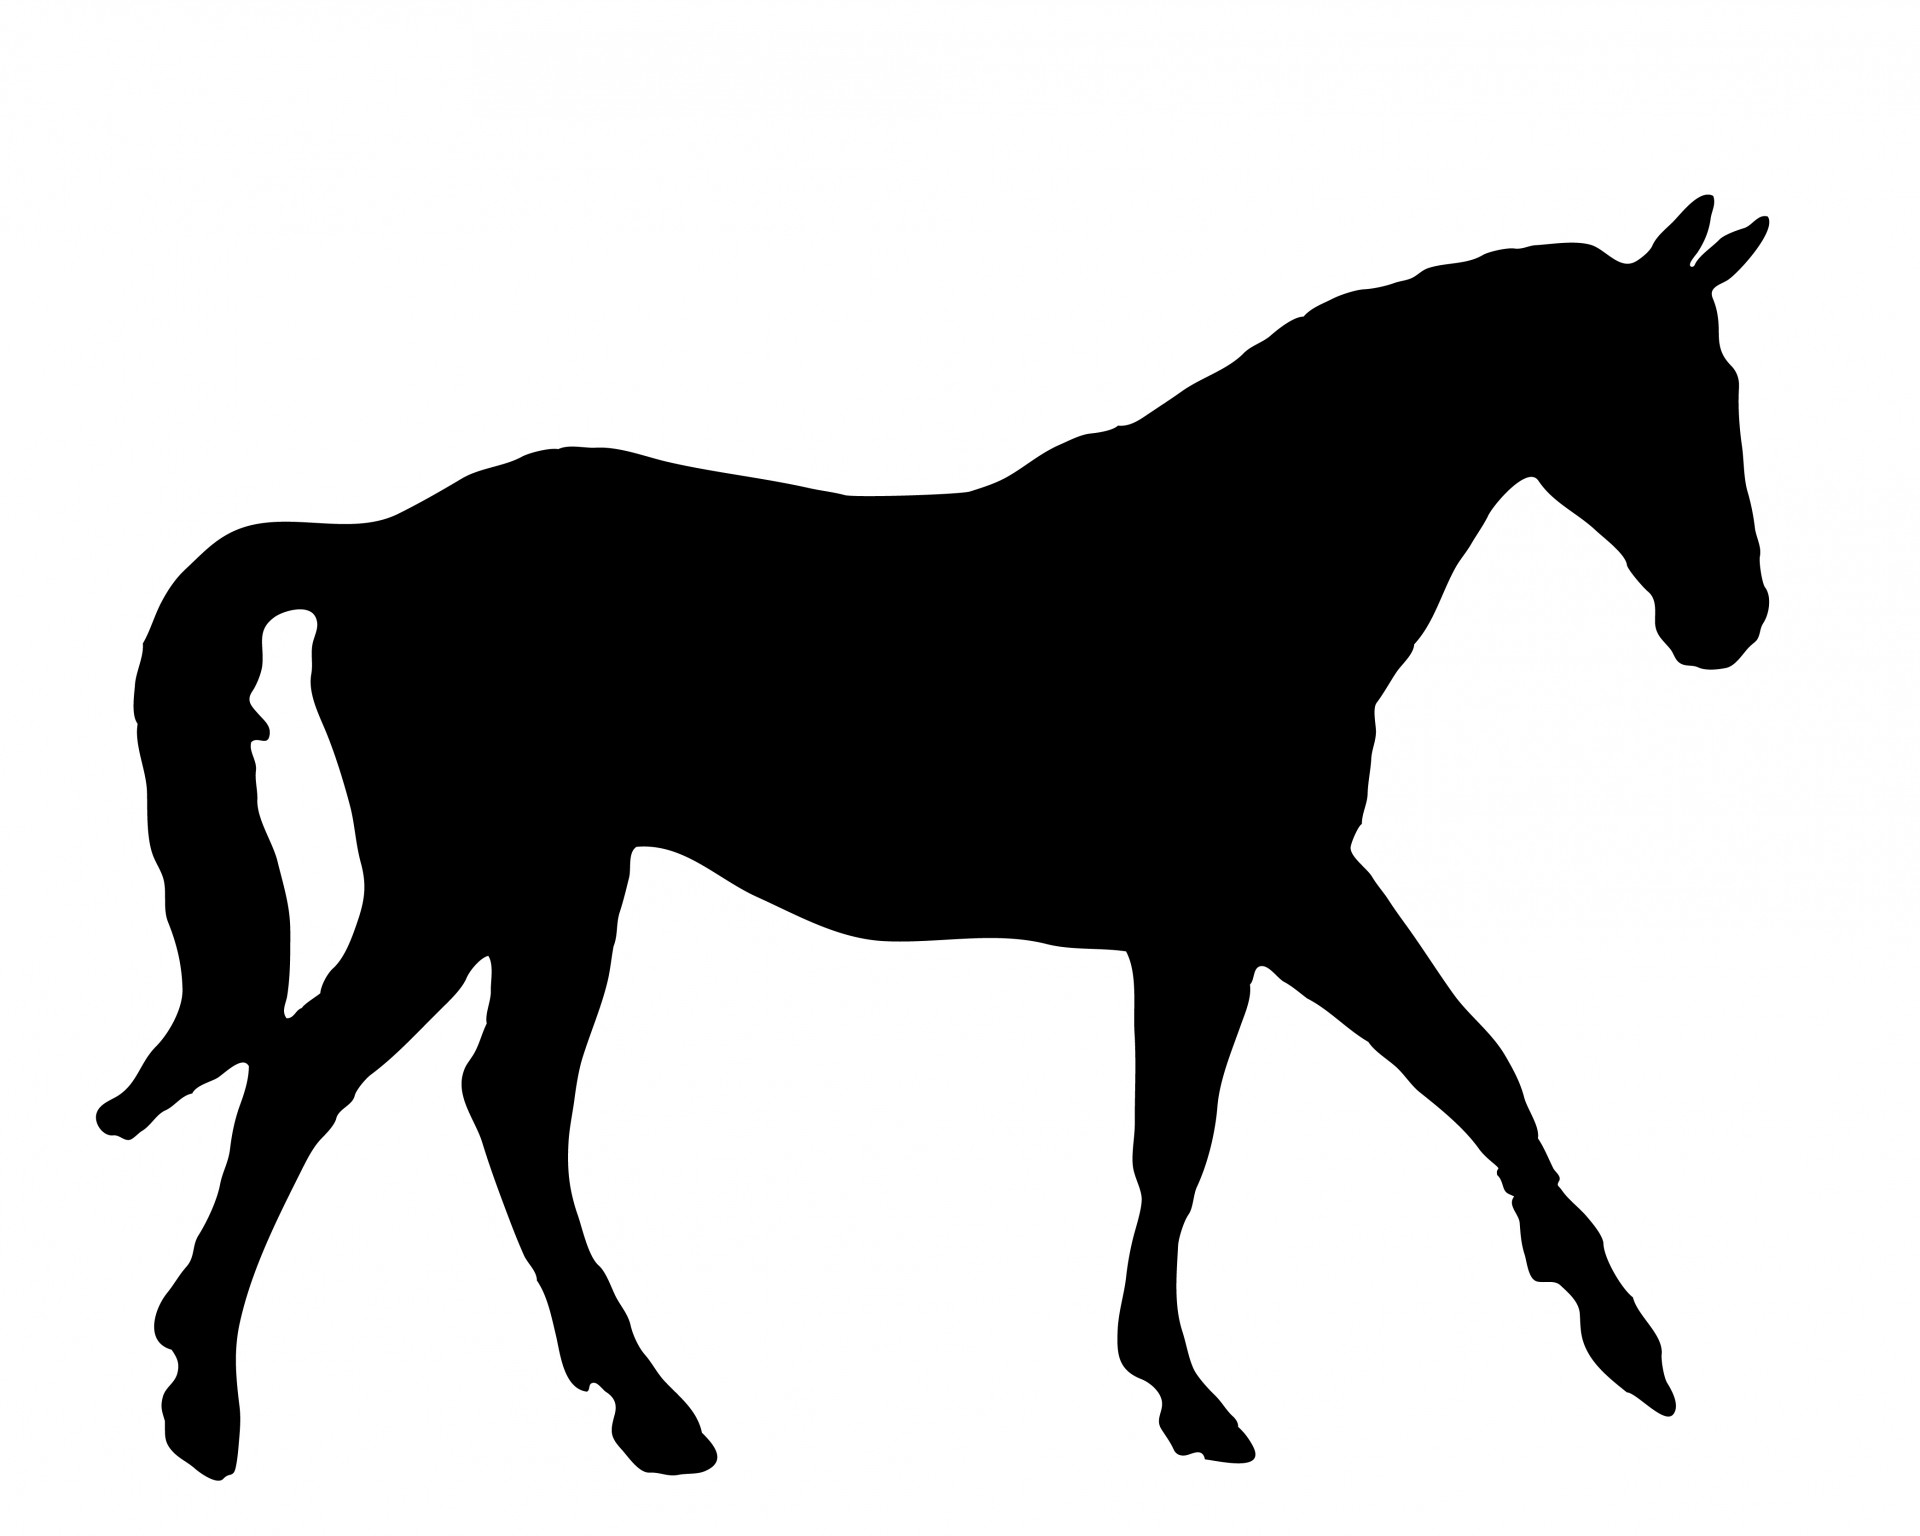 Black silhouette of a beautiful horse on white background